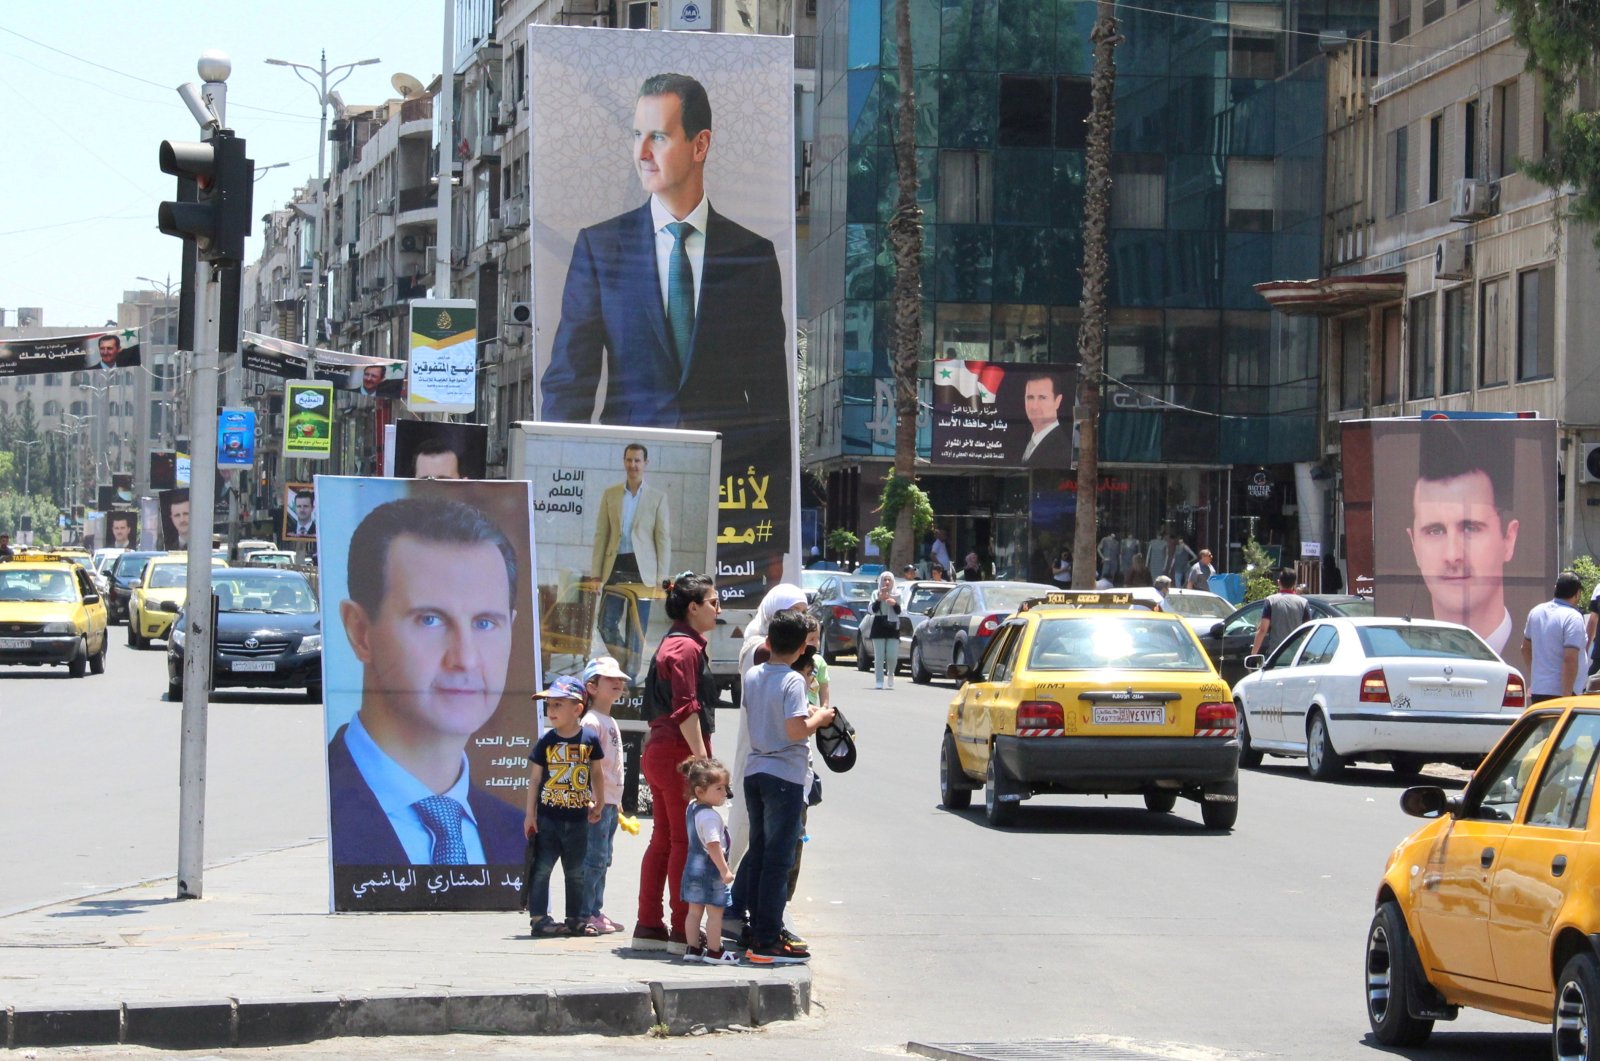 People stand near posters depicting Syria&#039;s President, ahead of the May 26 presidential election, in Damascus, Syria, May 18, 2021. (Reuters File Photo)